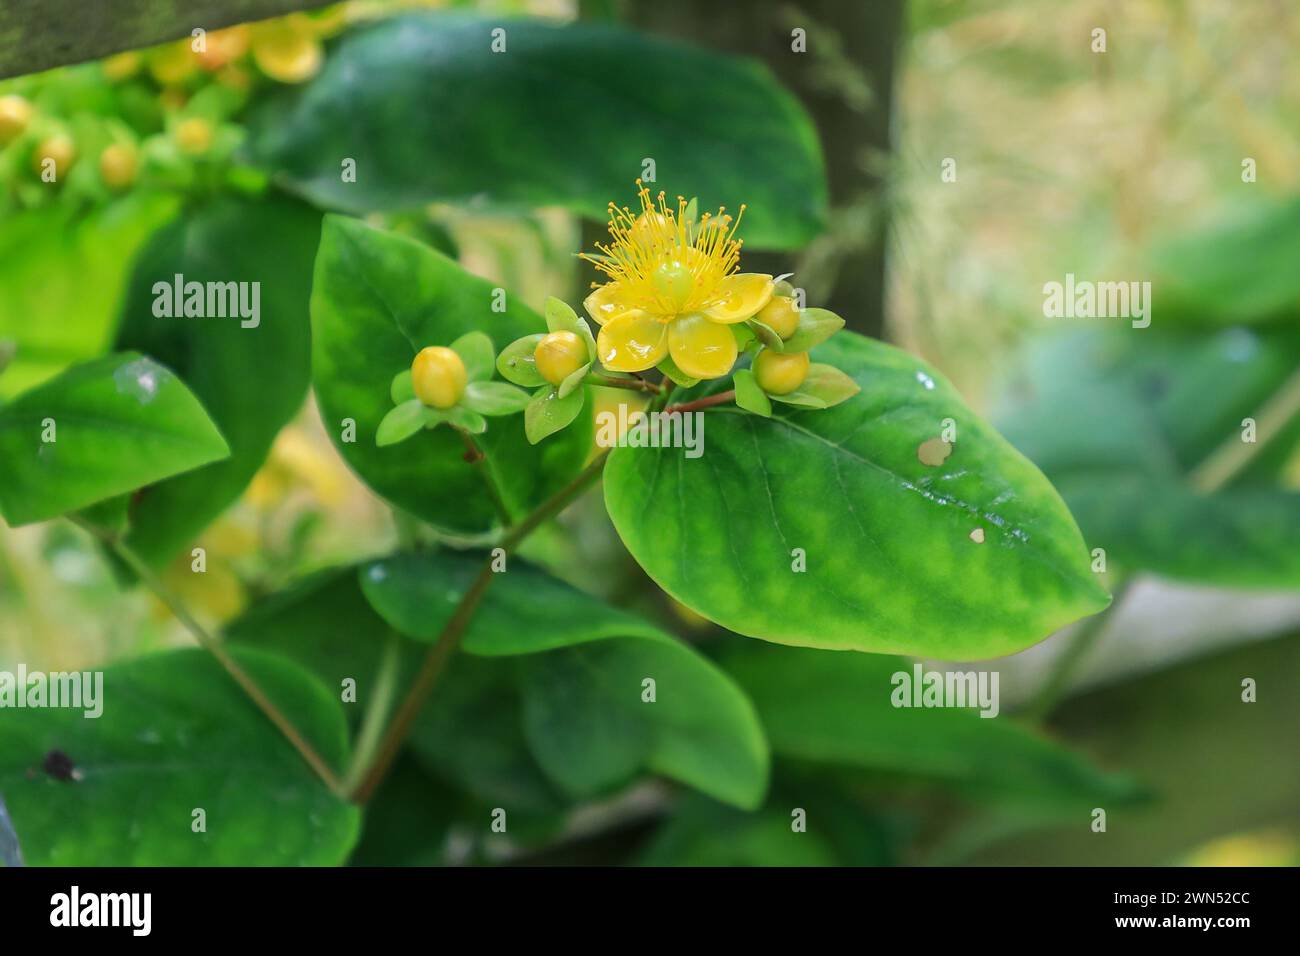 Hypericum androsaemum, the shrubby St. John's wort, a flowering plant in the family Hypericaceae. Commonly called tutsan or sweet-amber, England, UK Stock Photo